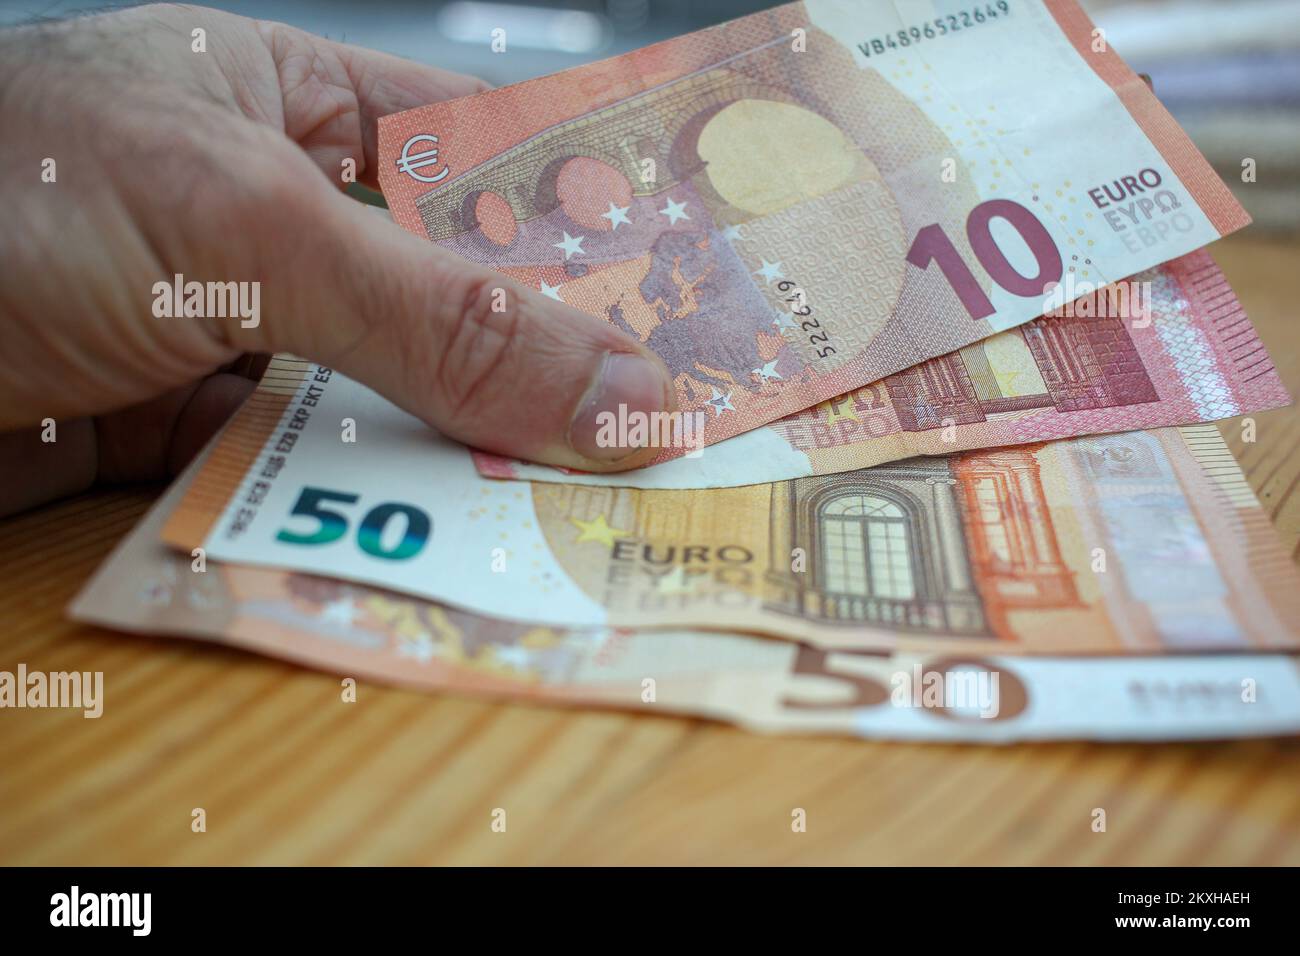 euro notes to use in difficult times for the economy Stock Photo